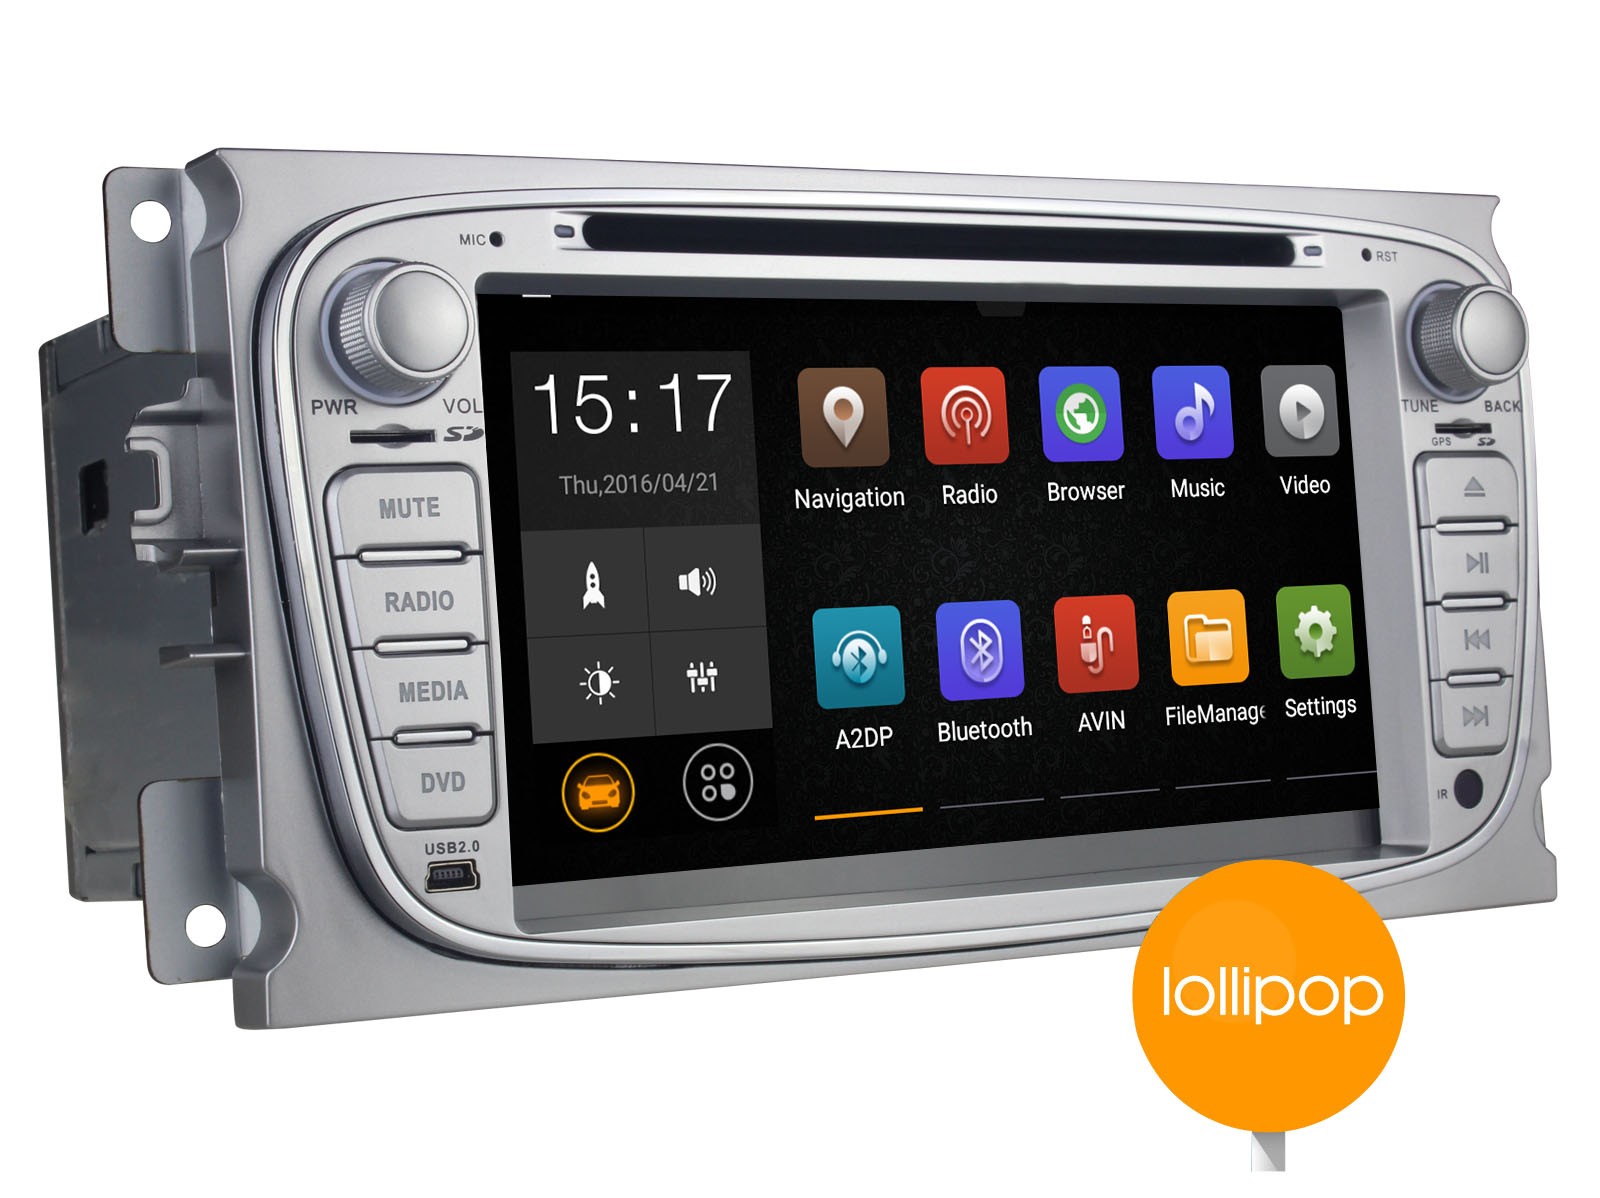 JOYING Best Plug and Play Ford Focus Android 5.1.1 Lollipop Car Radio